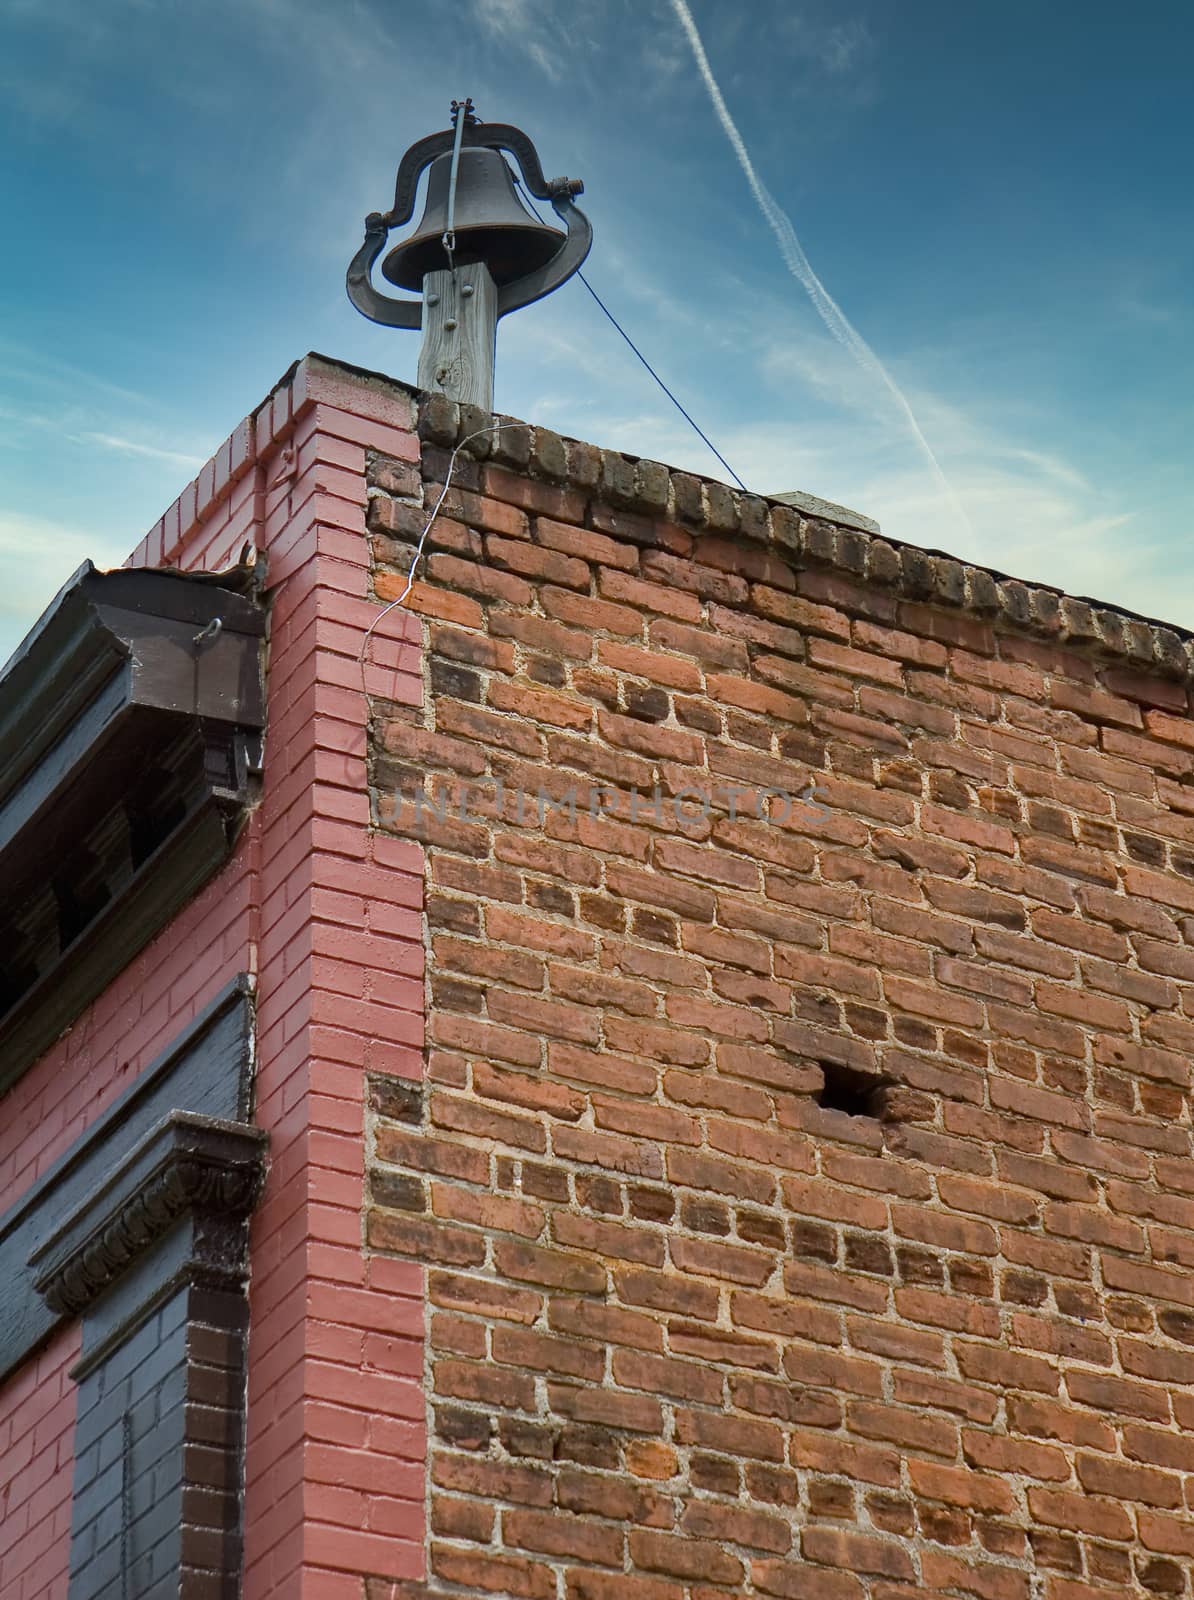 An old brick building with an old bell on top